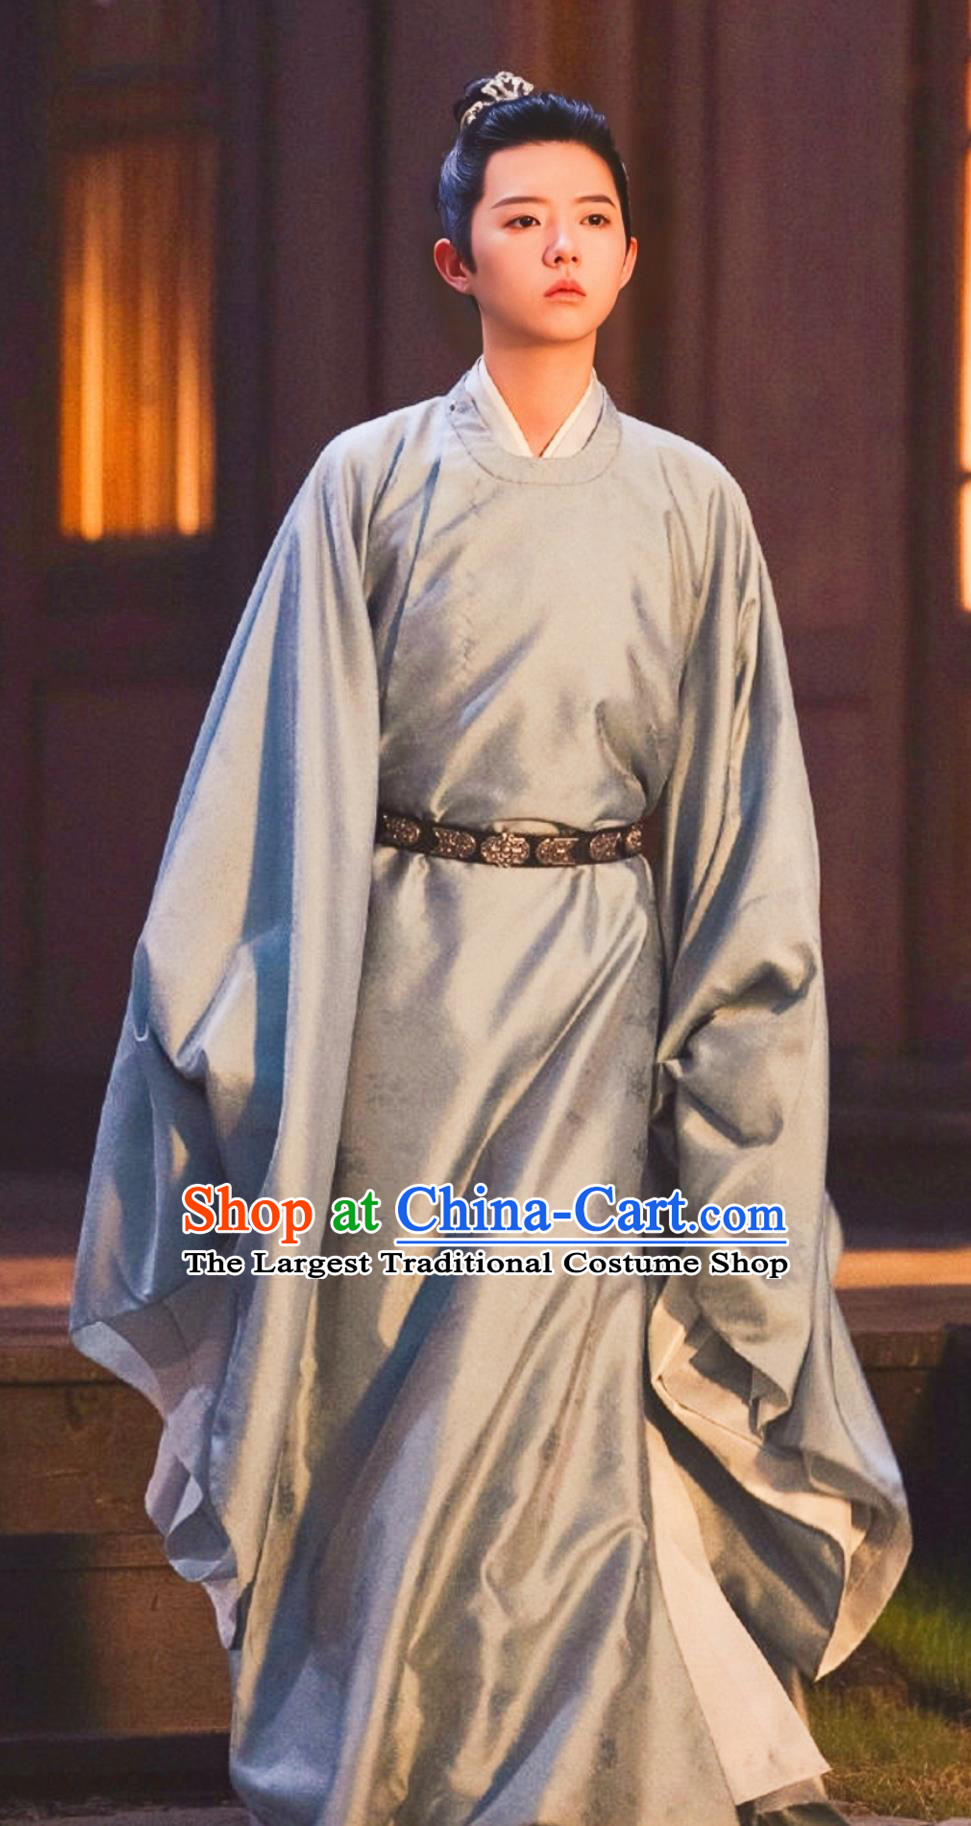 China Ancient Young Childe Clothing 2023 TV Series A Journey To Love Princess Yang Ying Costume